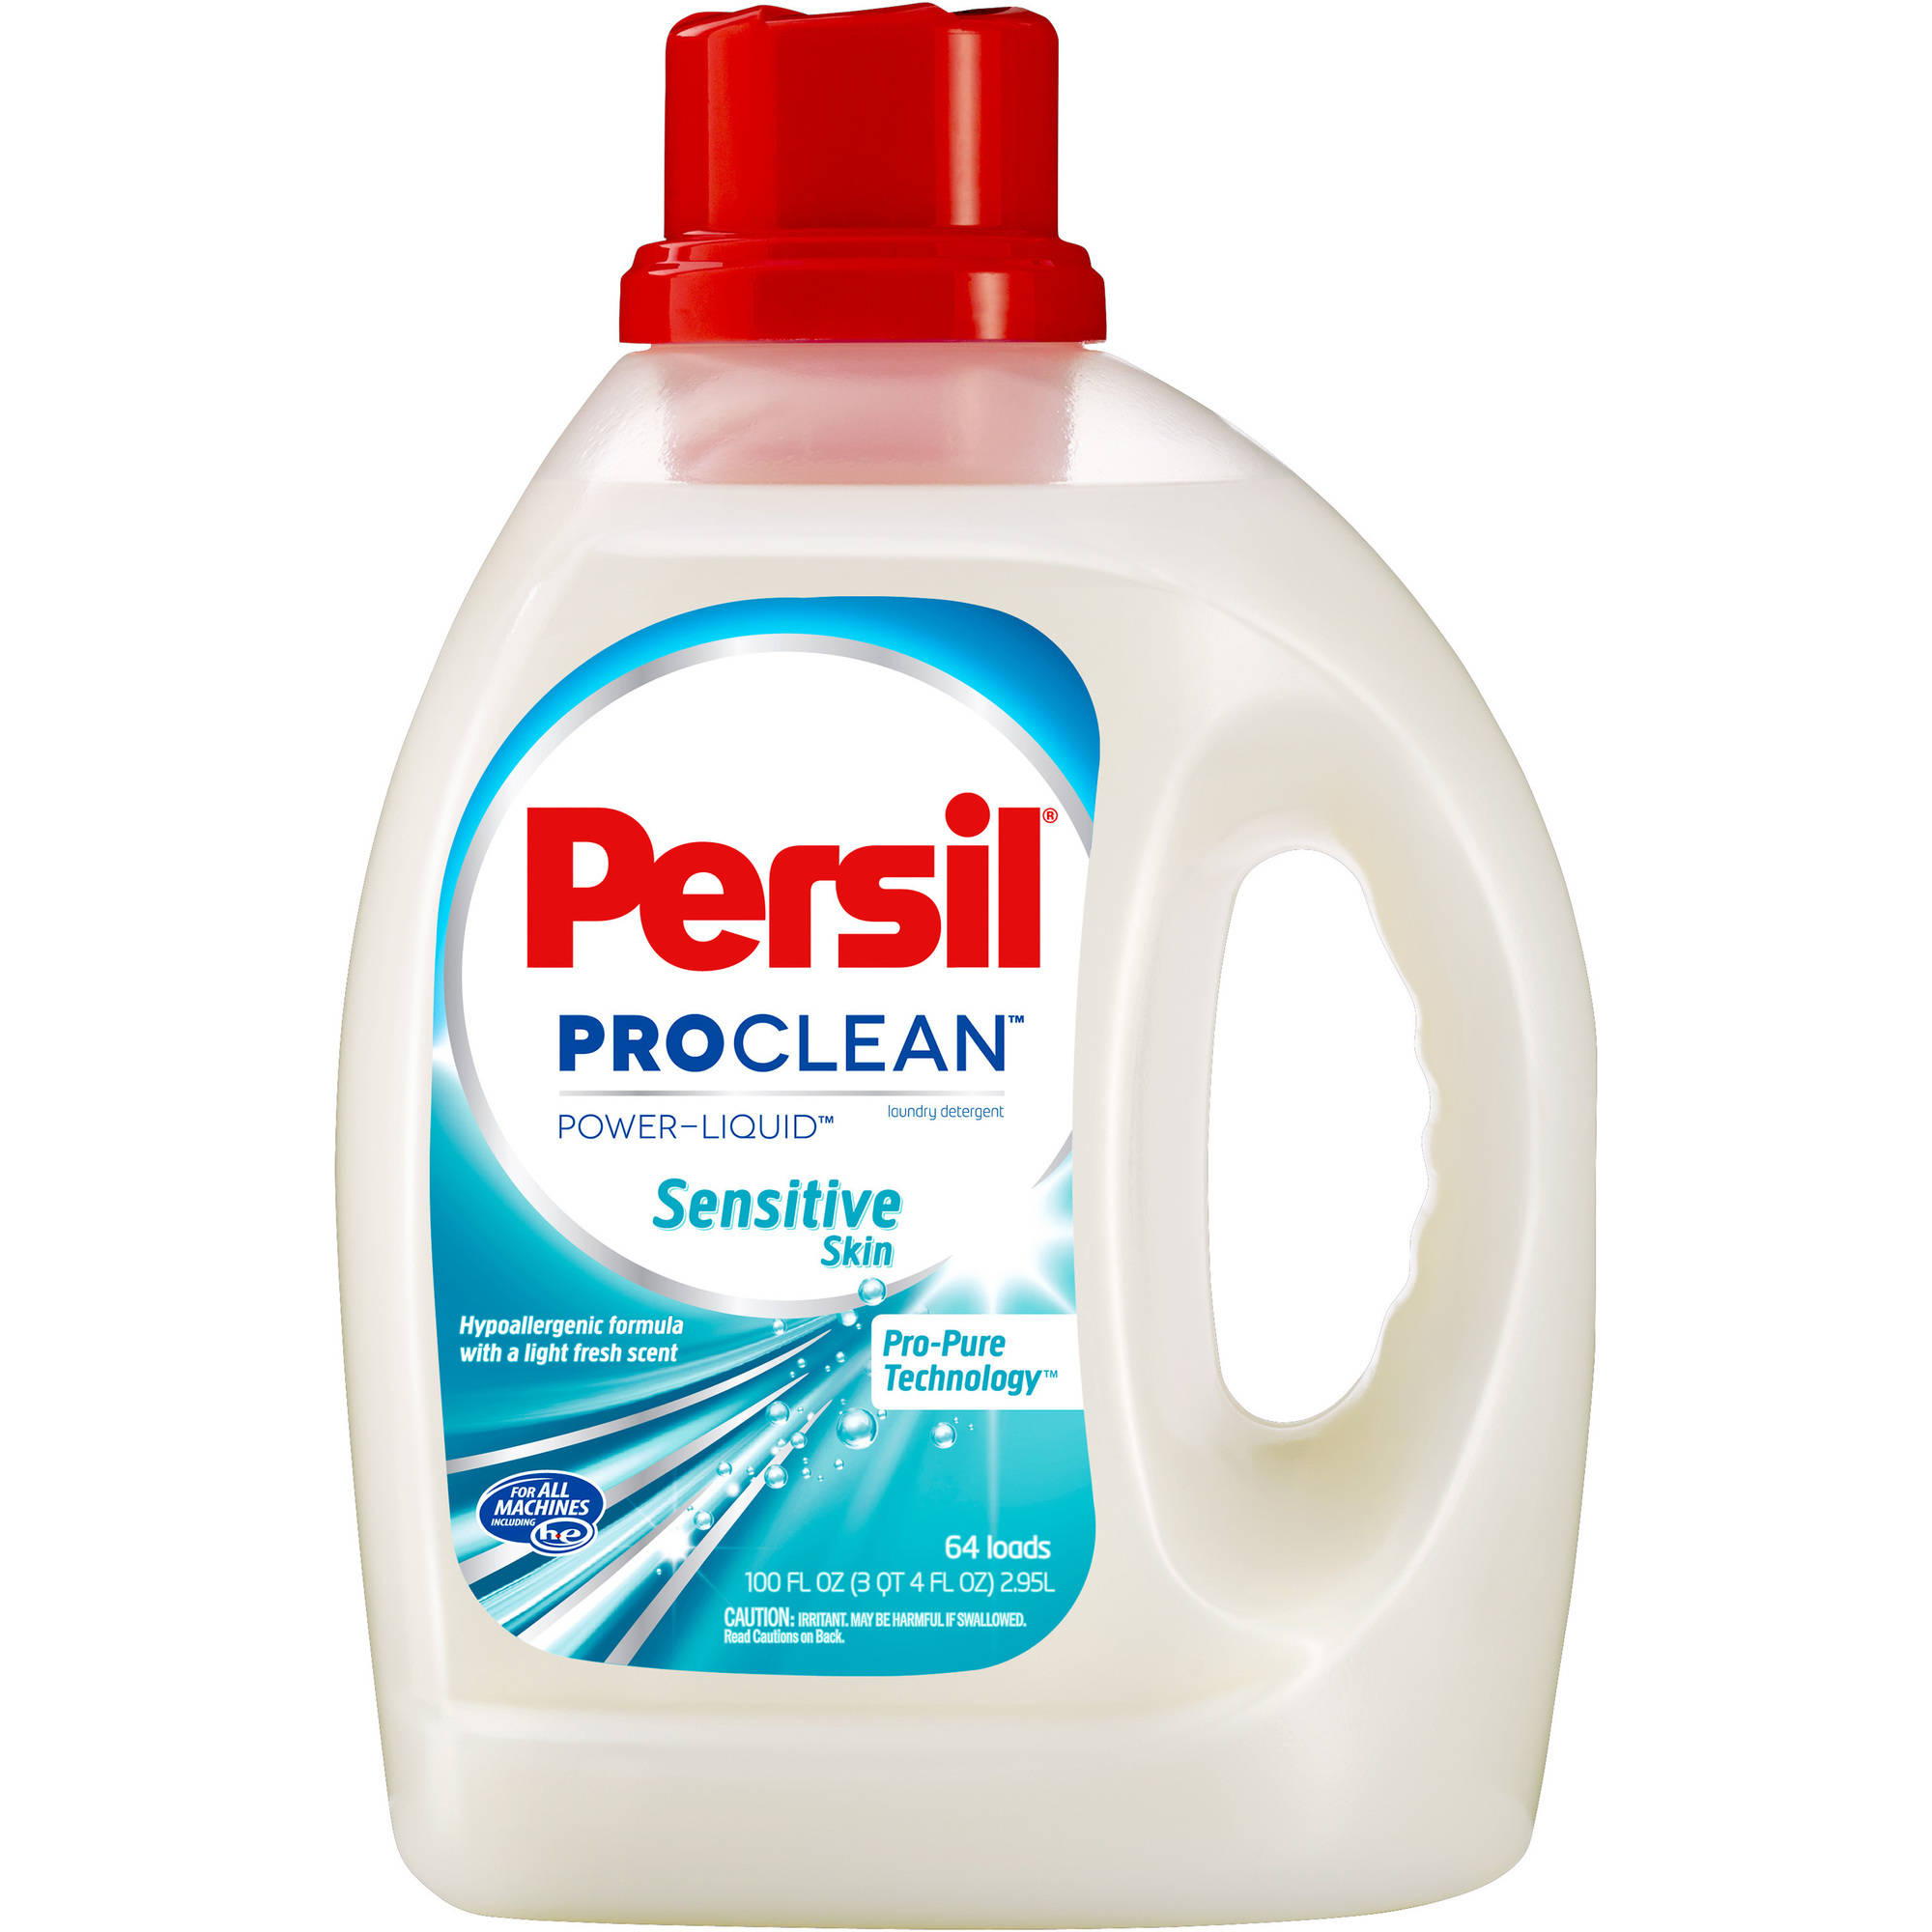 Free 5 Rebate Check Wyb 20 In Persil Laundry Detergent